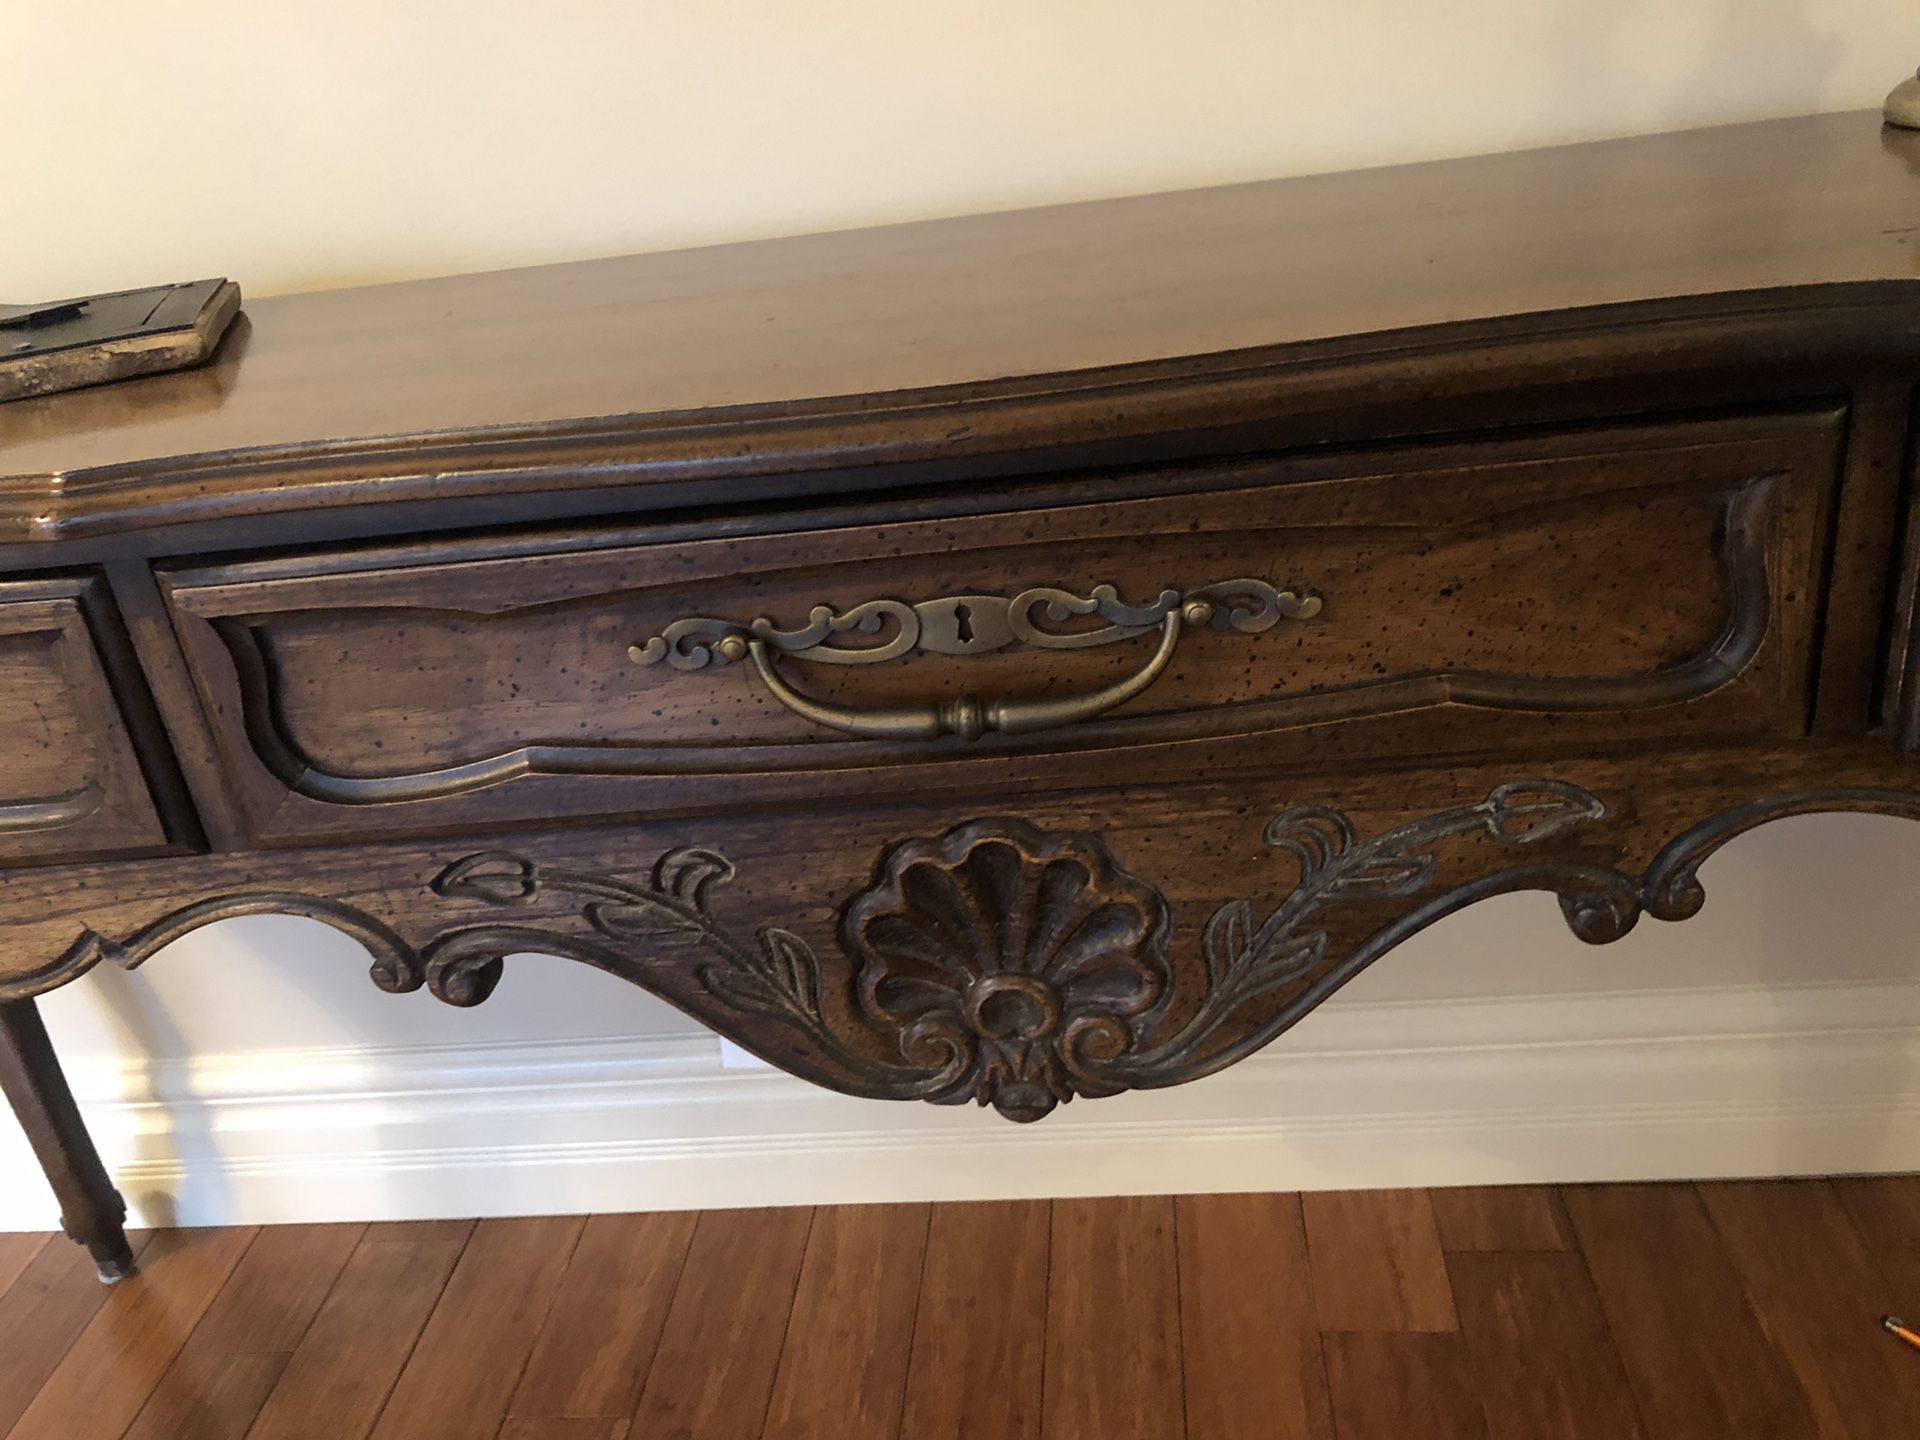 Victorian console table